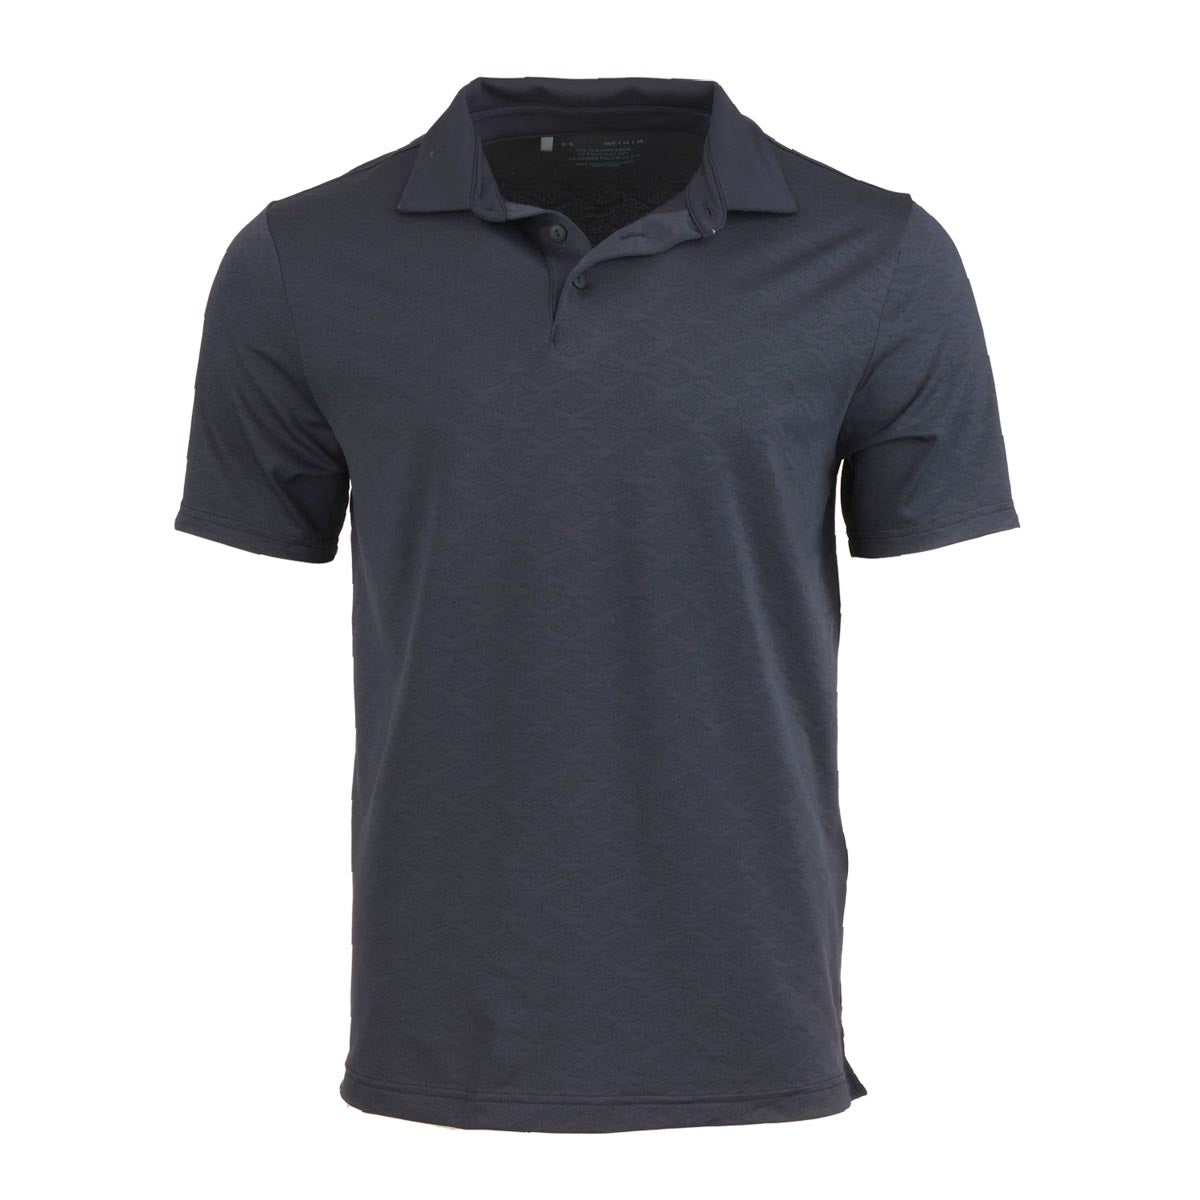 Image of Under Armour Men's Playoff 3.0 Albatross Jacquard Polo